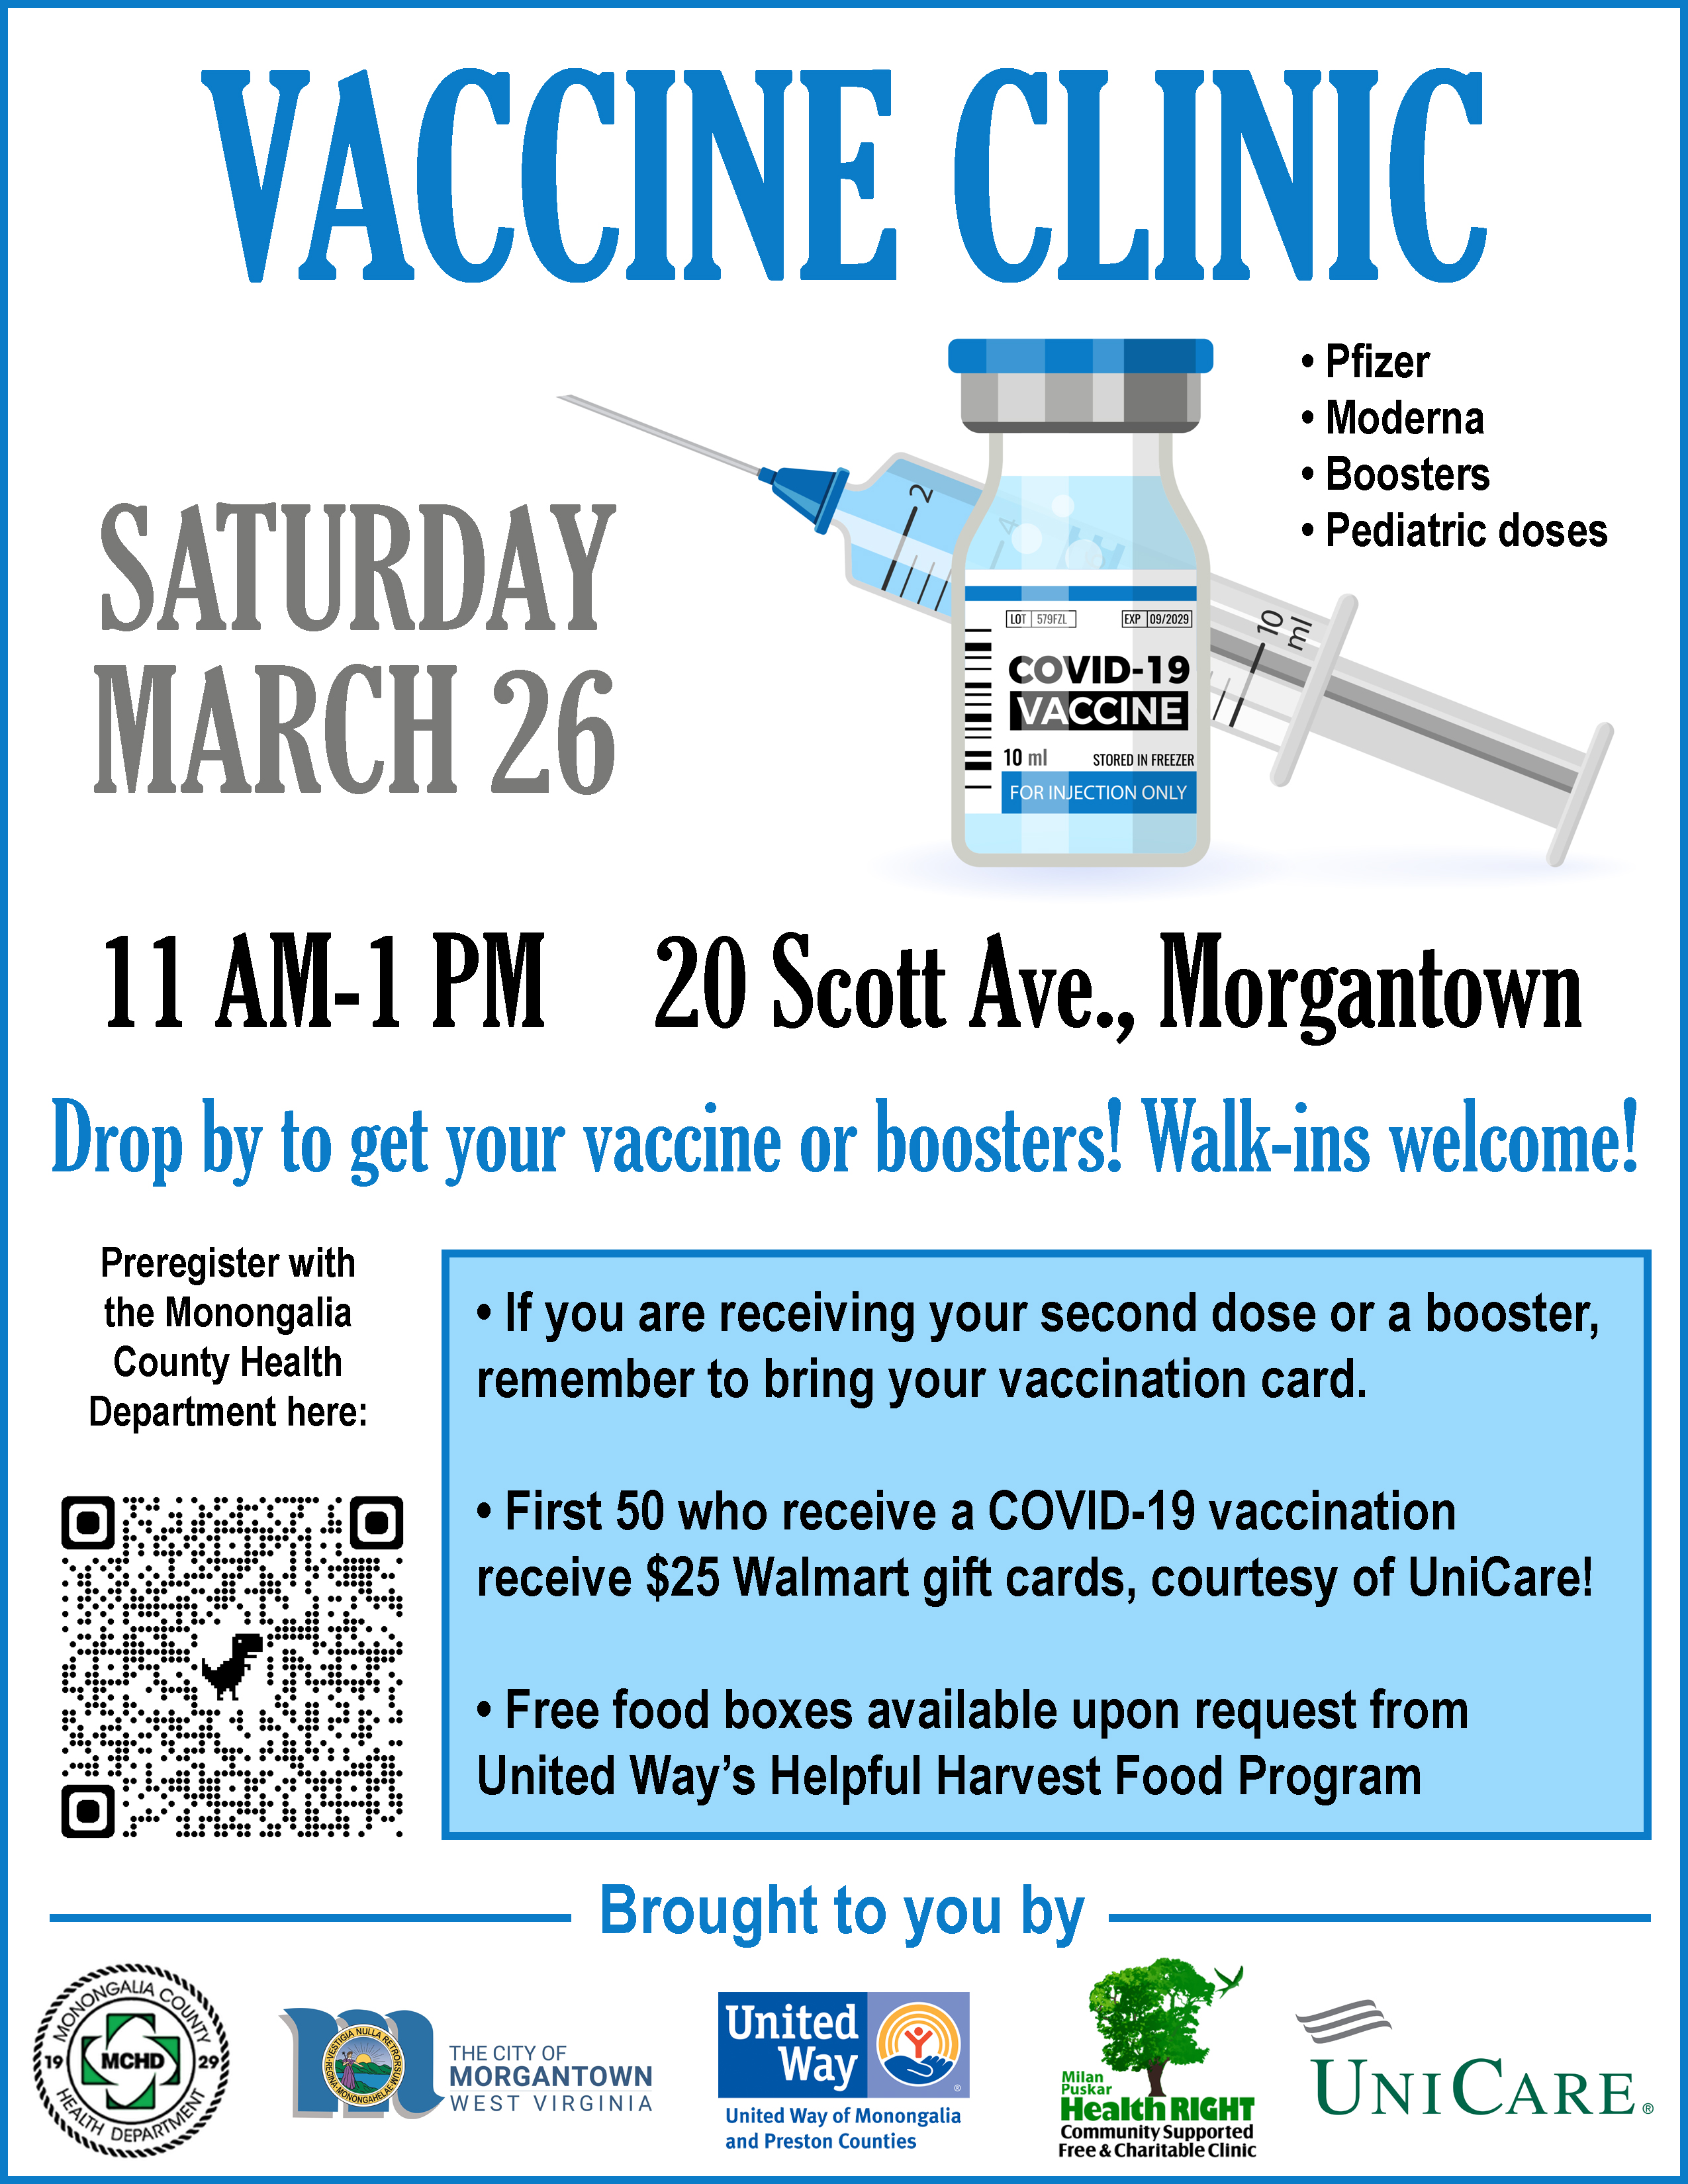 A vaccine clinic will be held March 26